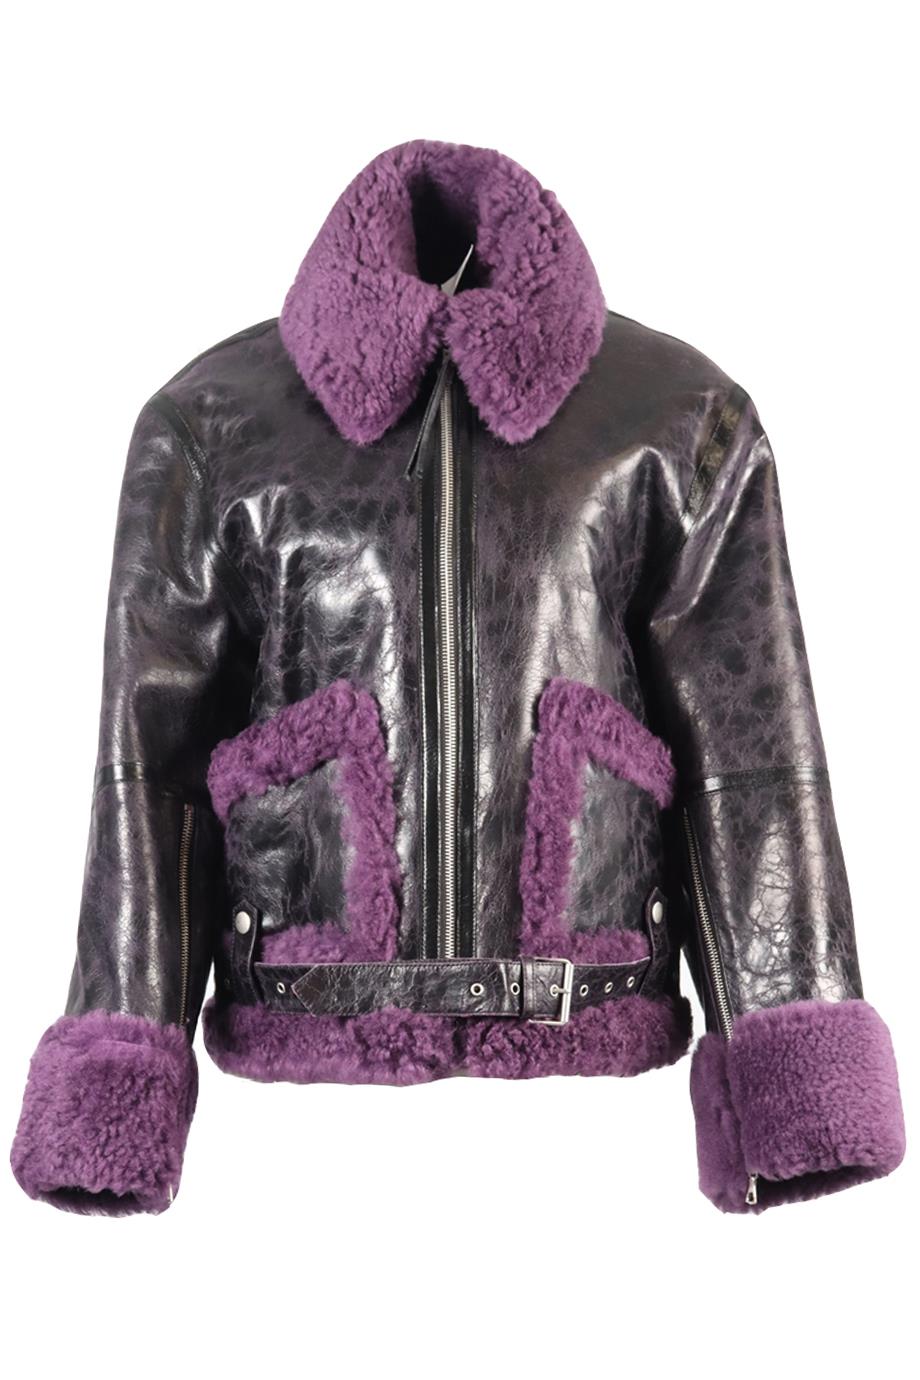 DRIES VAN NOTEN SHEARLING AND LEATHER JACKET SMALL